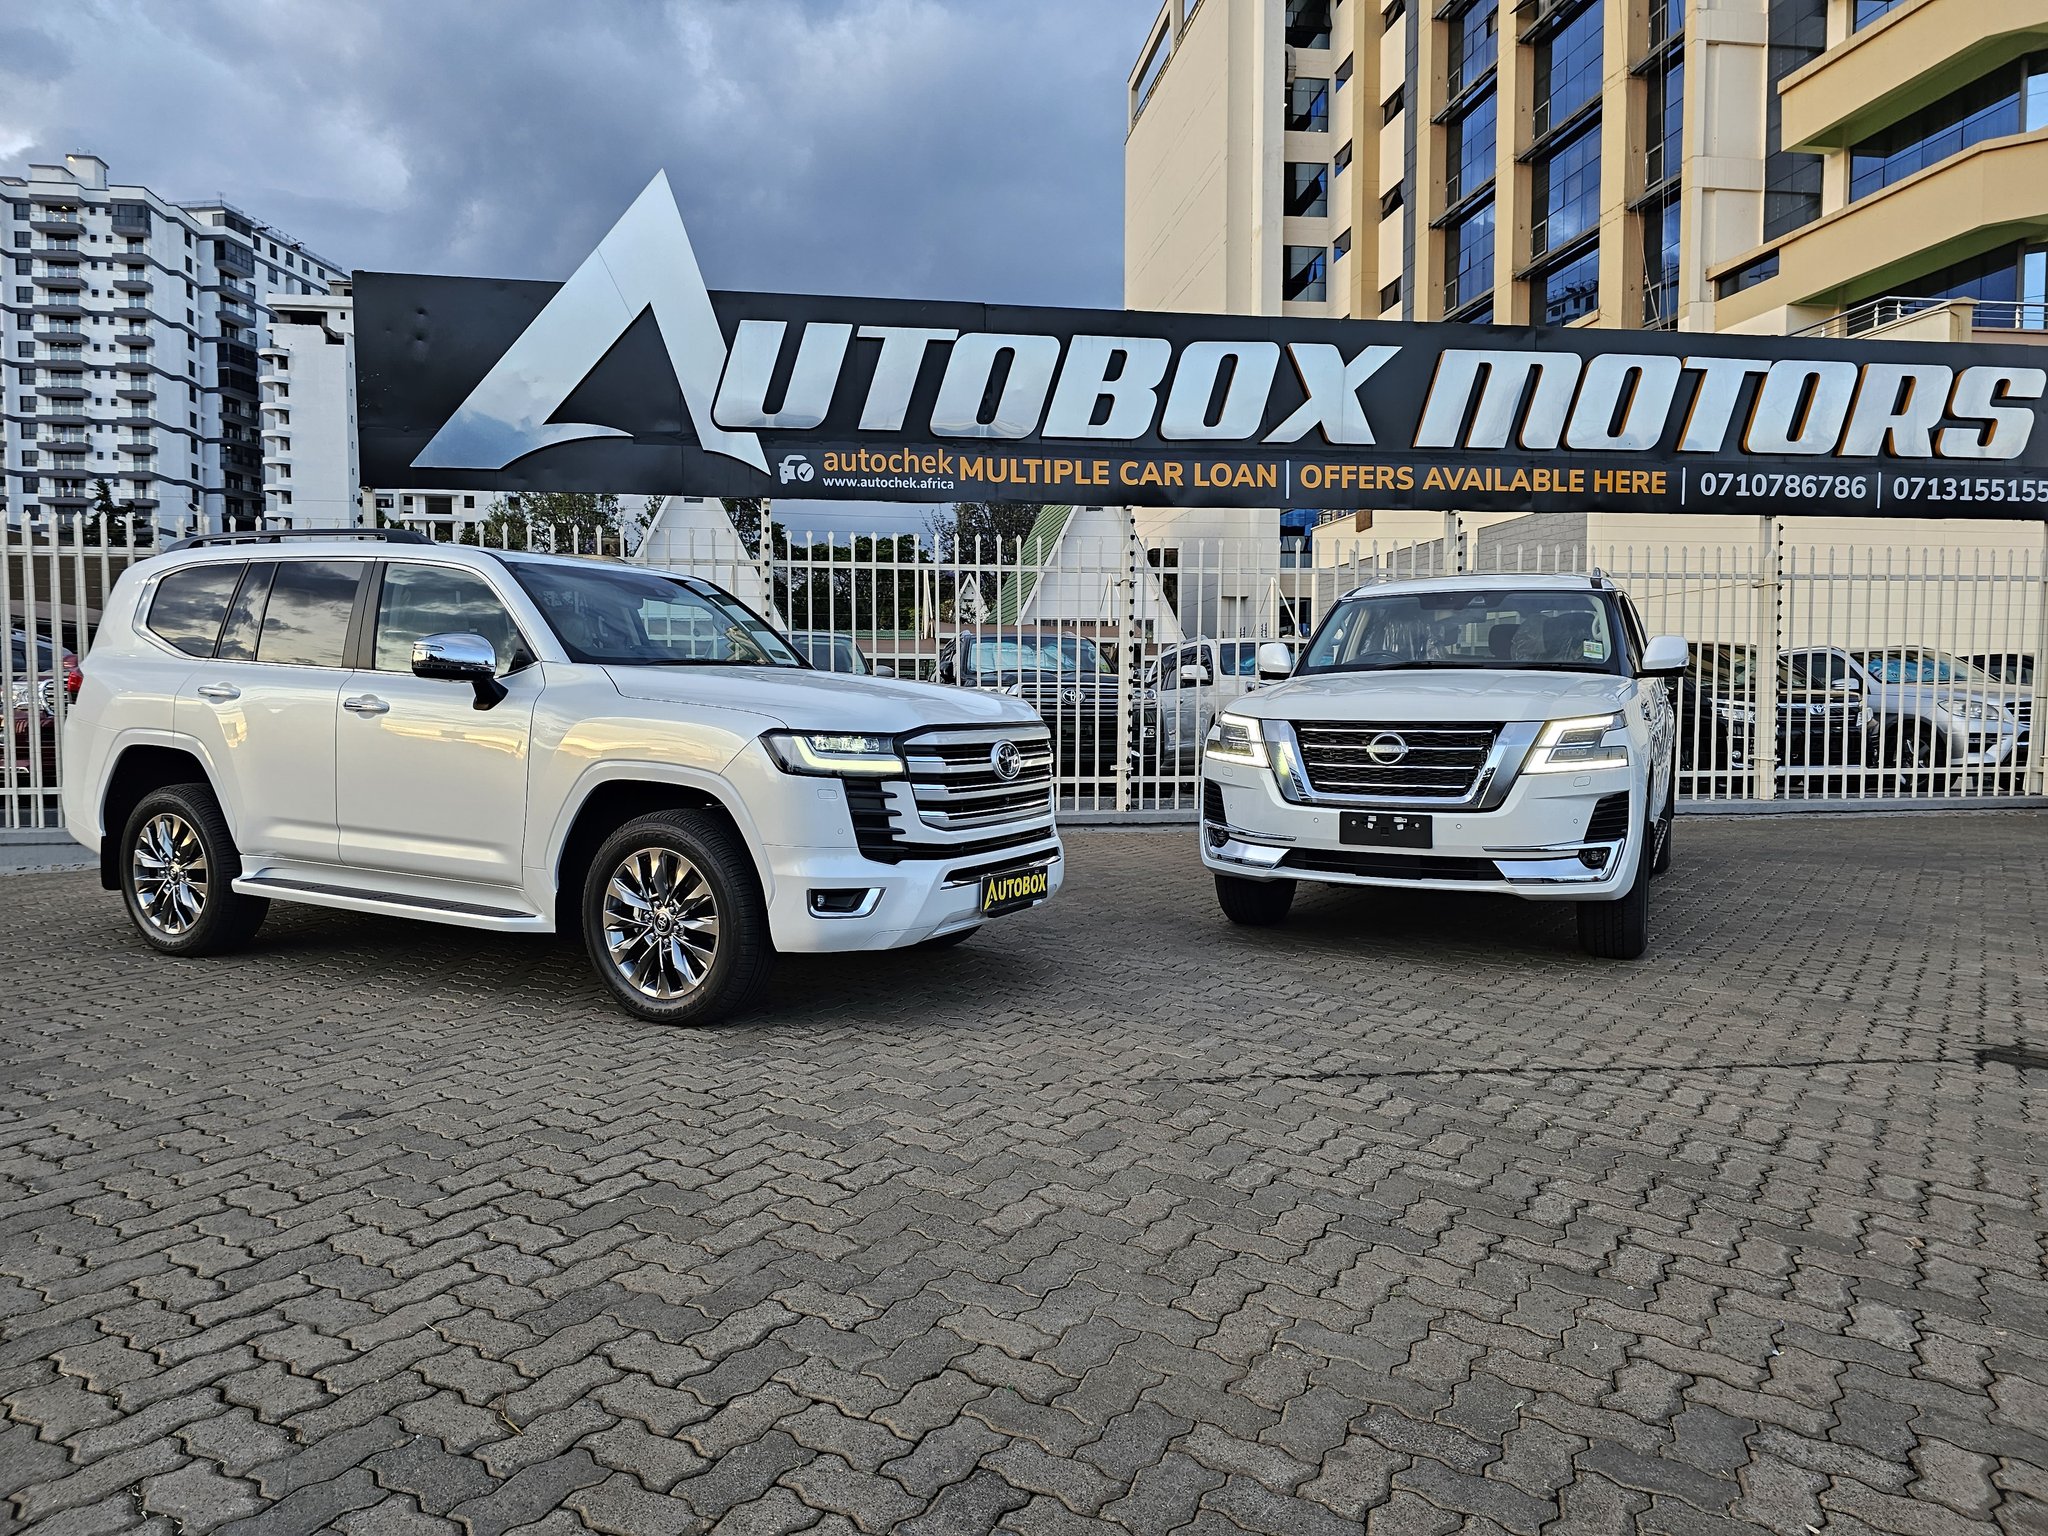 Autobox on X: Class, luxury, elegance, comfort name them all. Only At  Autobox Motors. #Lexus #Lx570 #Carsforsaleinkenya Visit us today along  Ngong Rd next to Marsabit plaza. From as low as 15.5